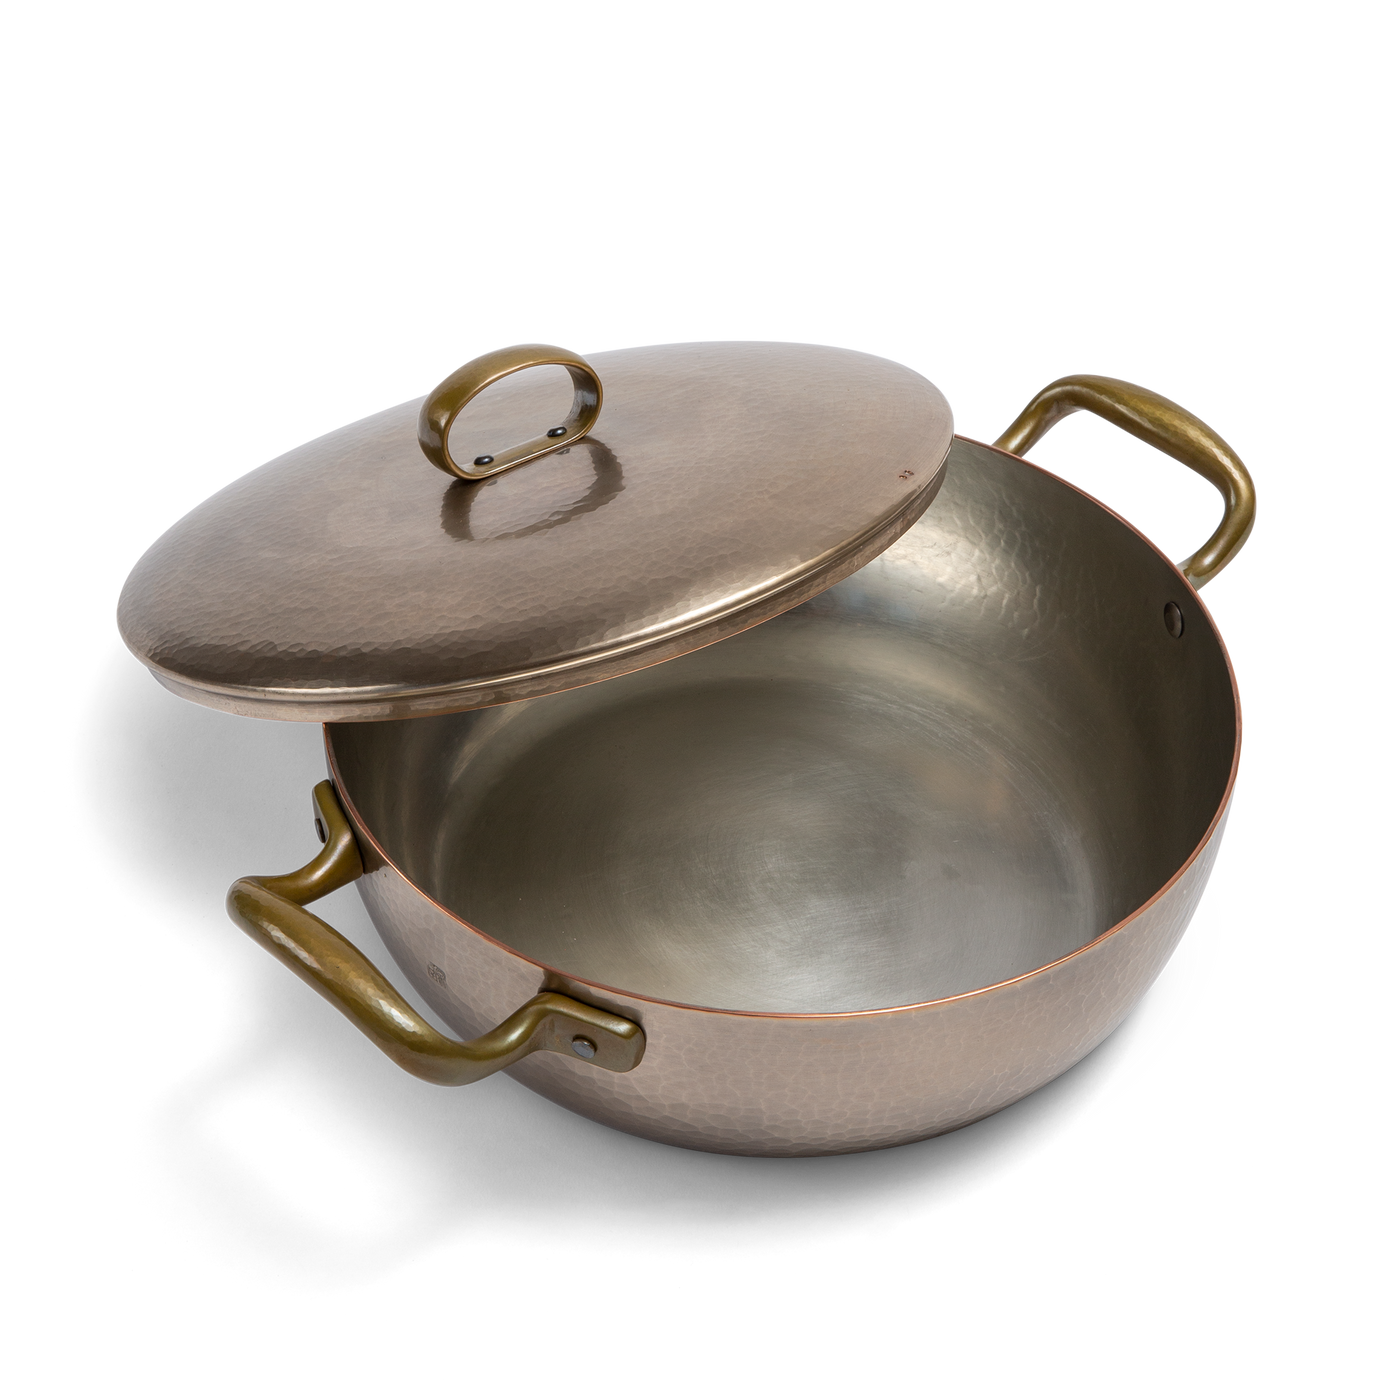 Two-handed pot with lid - 3.5 quarts